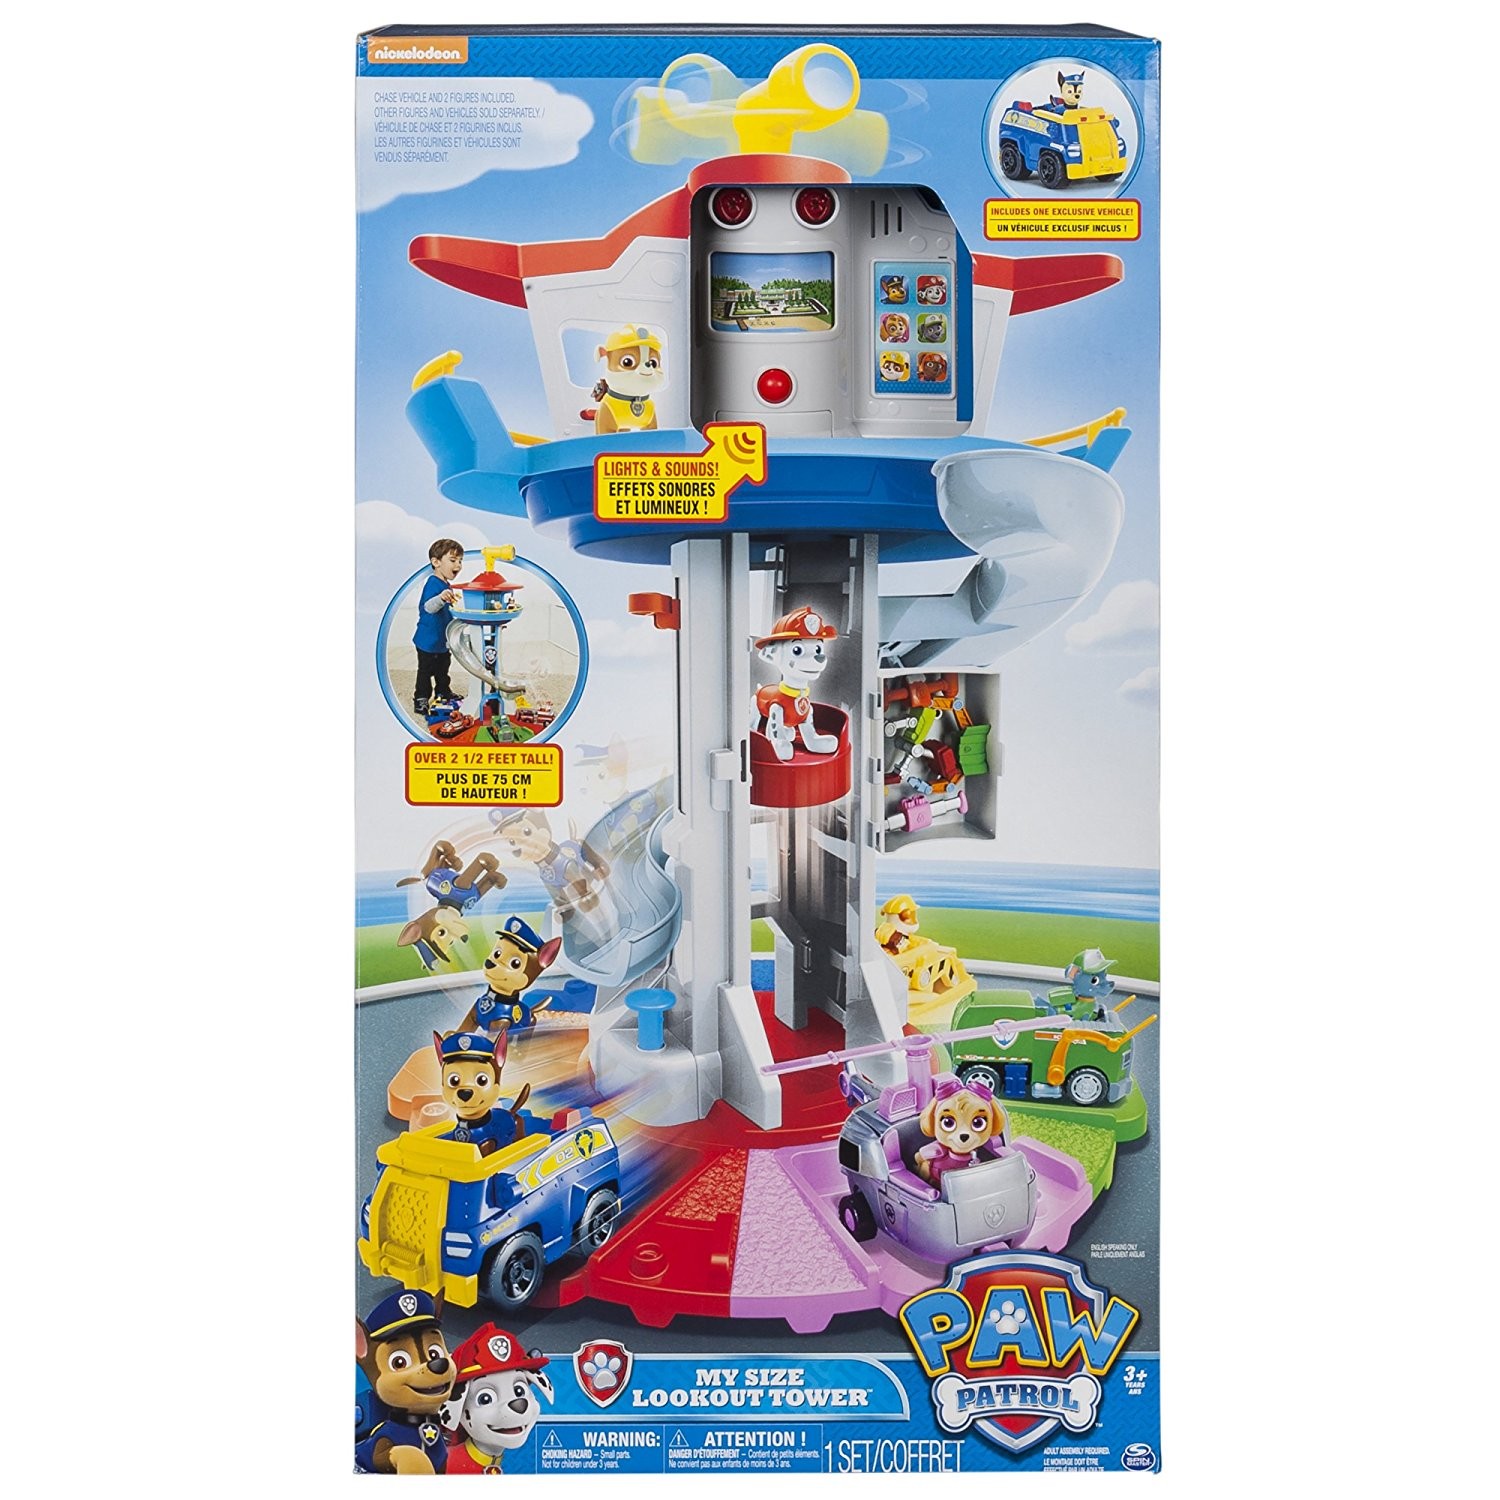 Paw Patrol - Size Lookout Tower (6037842)